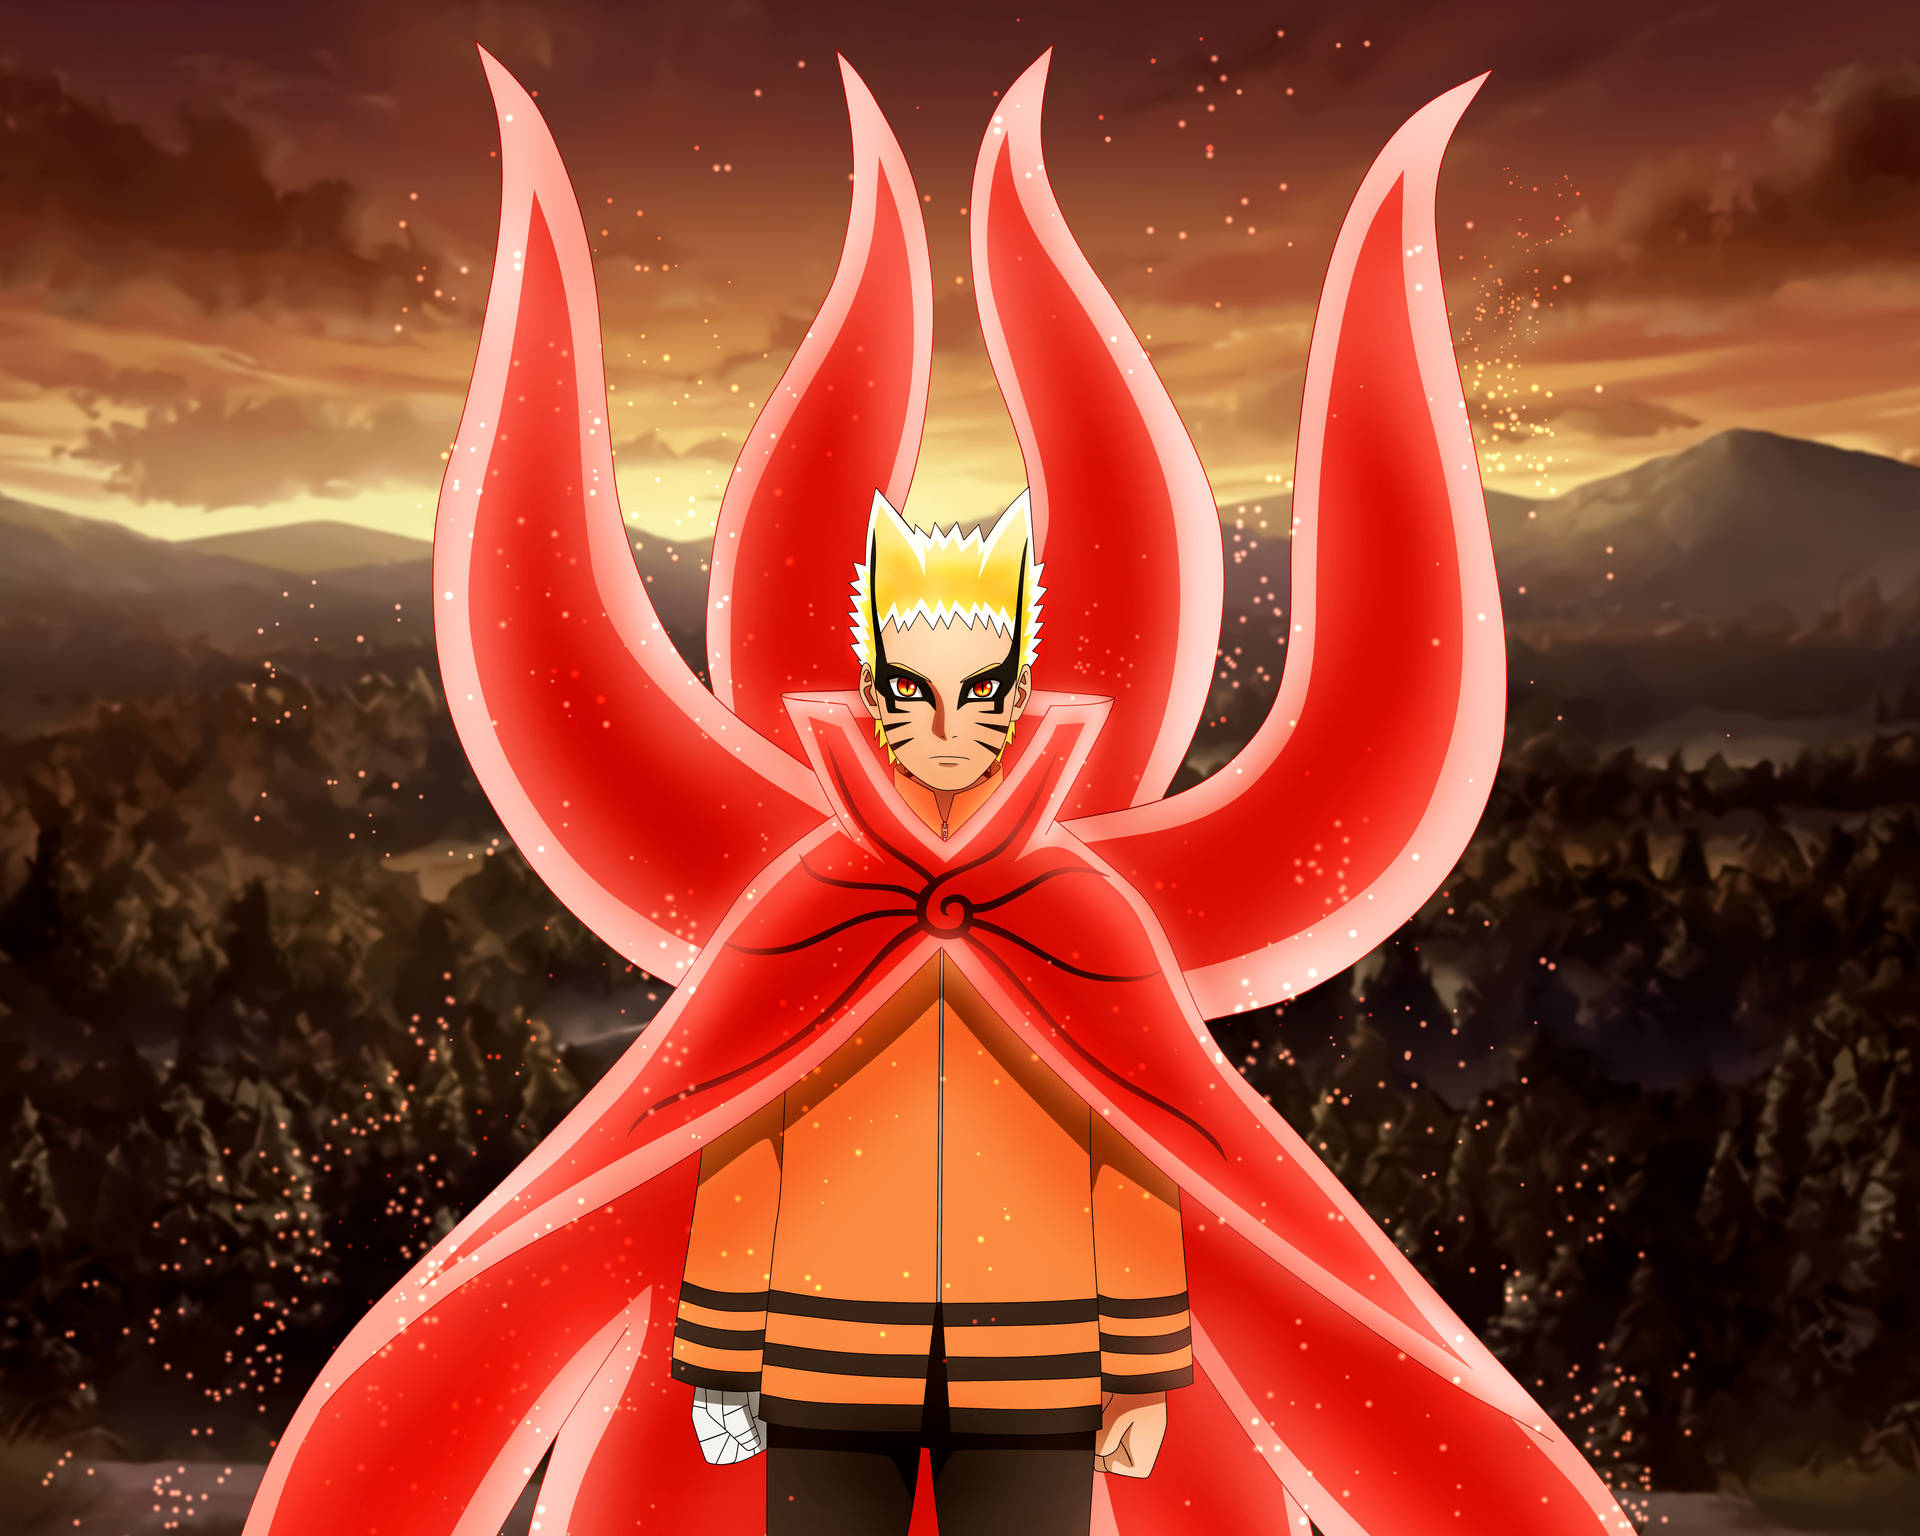 NARUTO'S FINAL FORM IS HERE AND ITS BEAUTIFUL - YouTube